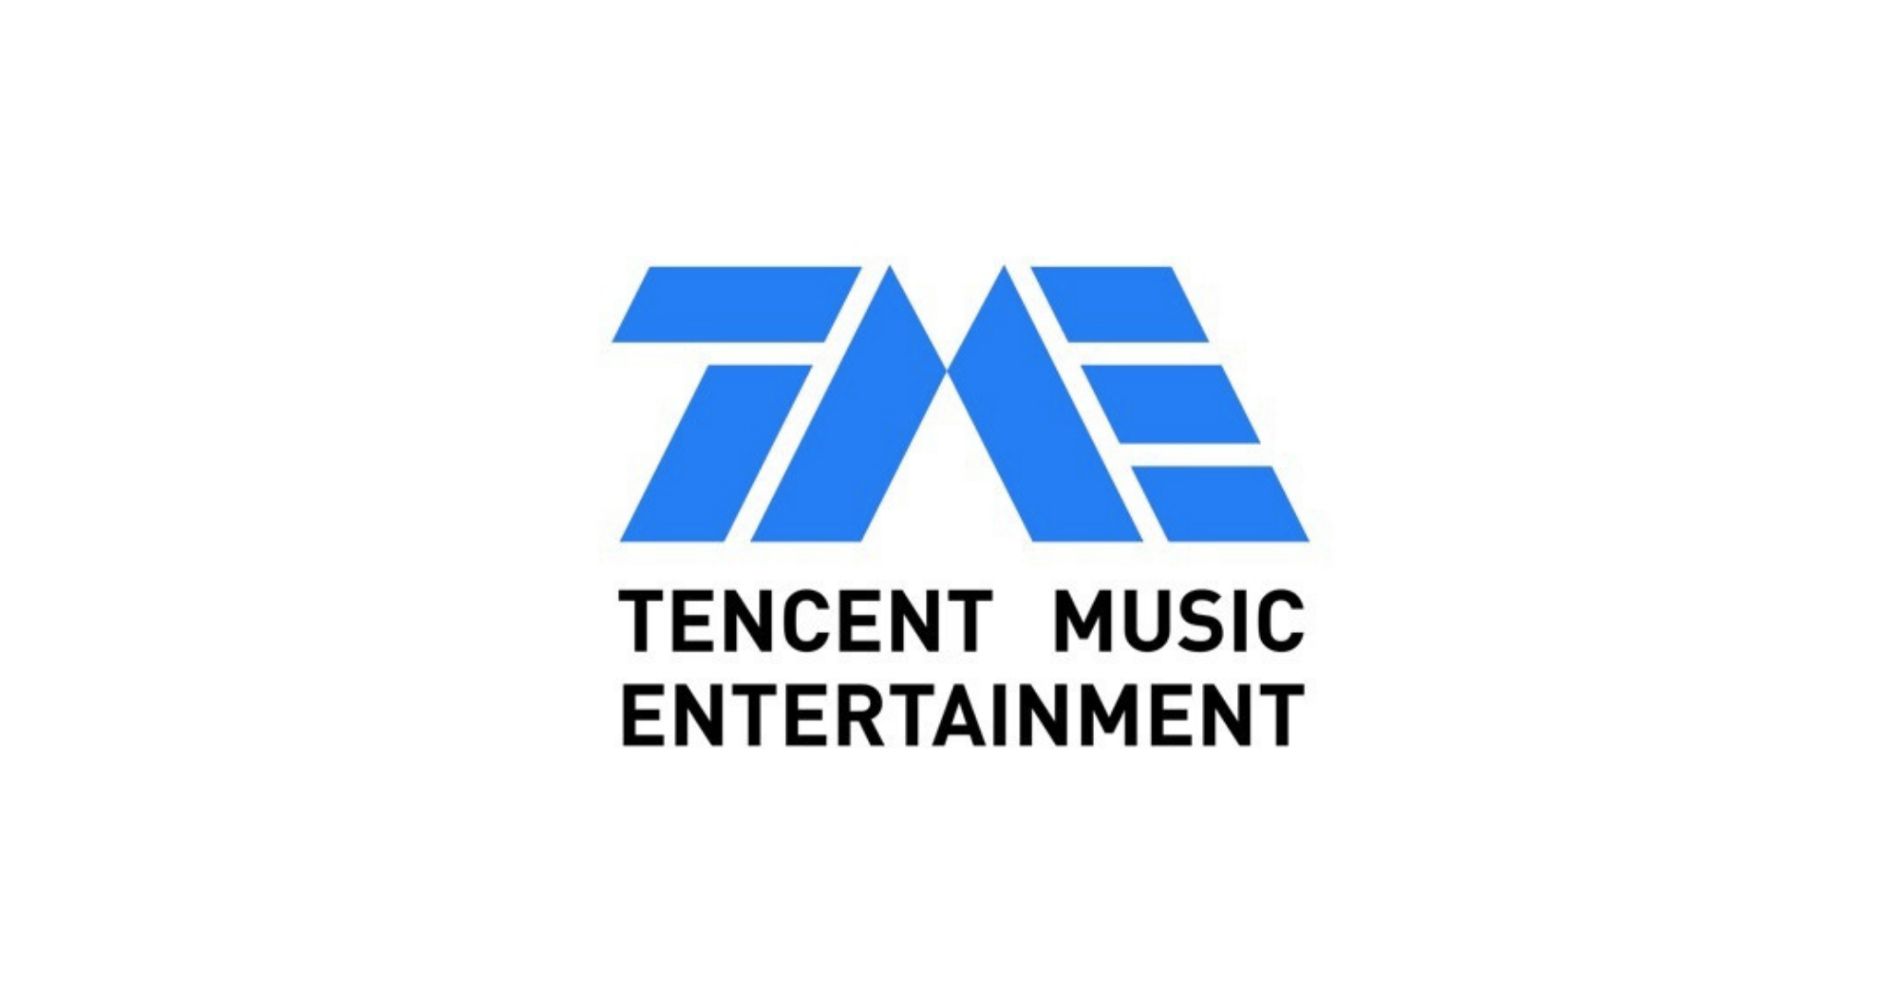 Tencent Music Entertainment Group launched TME Business Intelligence for Artists